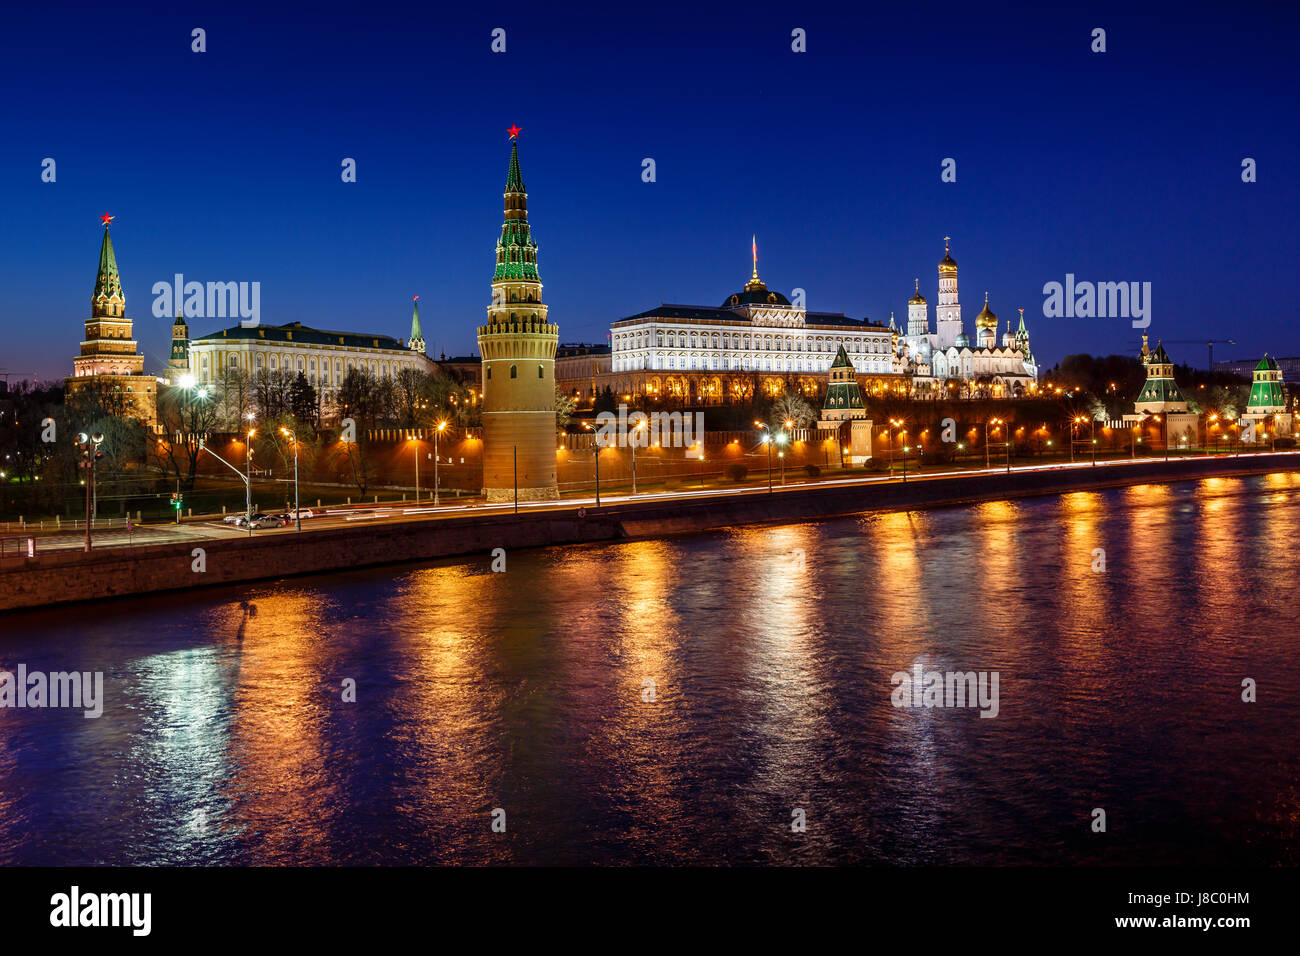 Moscow Kremlin Embankment and Vodovzvodnaya Tower in the Night, Russia Stock Photo